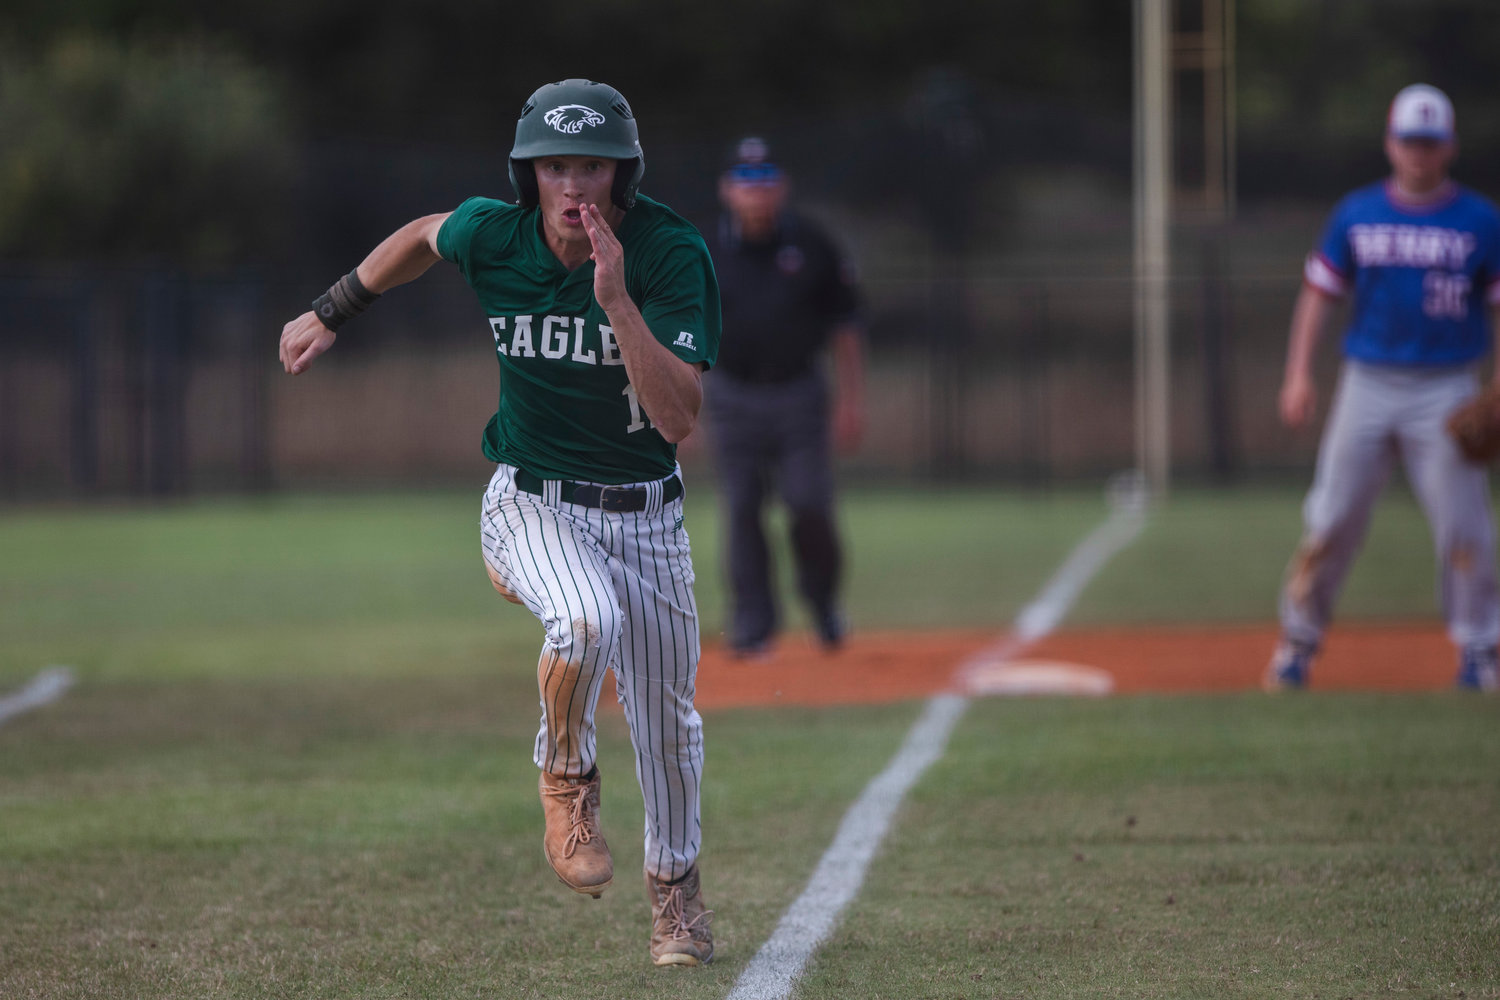 Eagle senior Cooper Schultze scampers home to score a run in Bayshore Christian’s Class 1A state quarterfinal series against the Berry Wildcats at Coastal Church in Daphne Thursday, May 5.